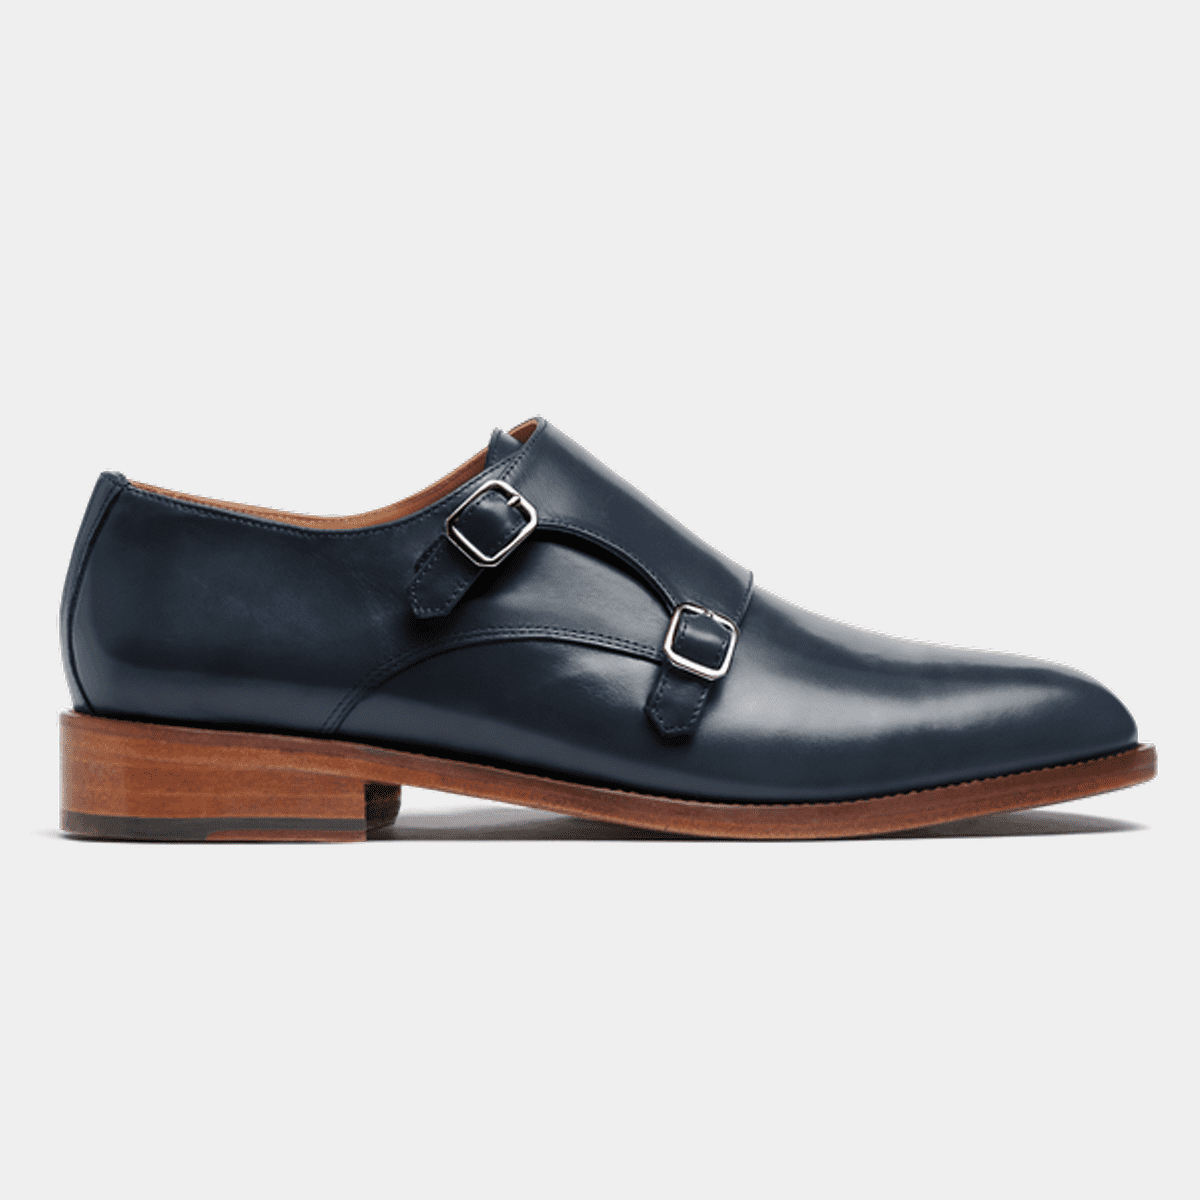 Double monk strap shoes - blue italian calf leather